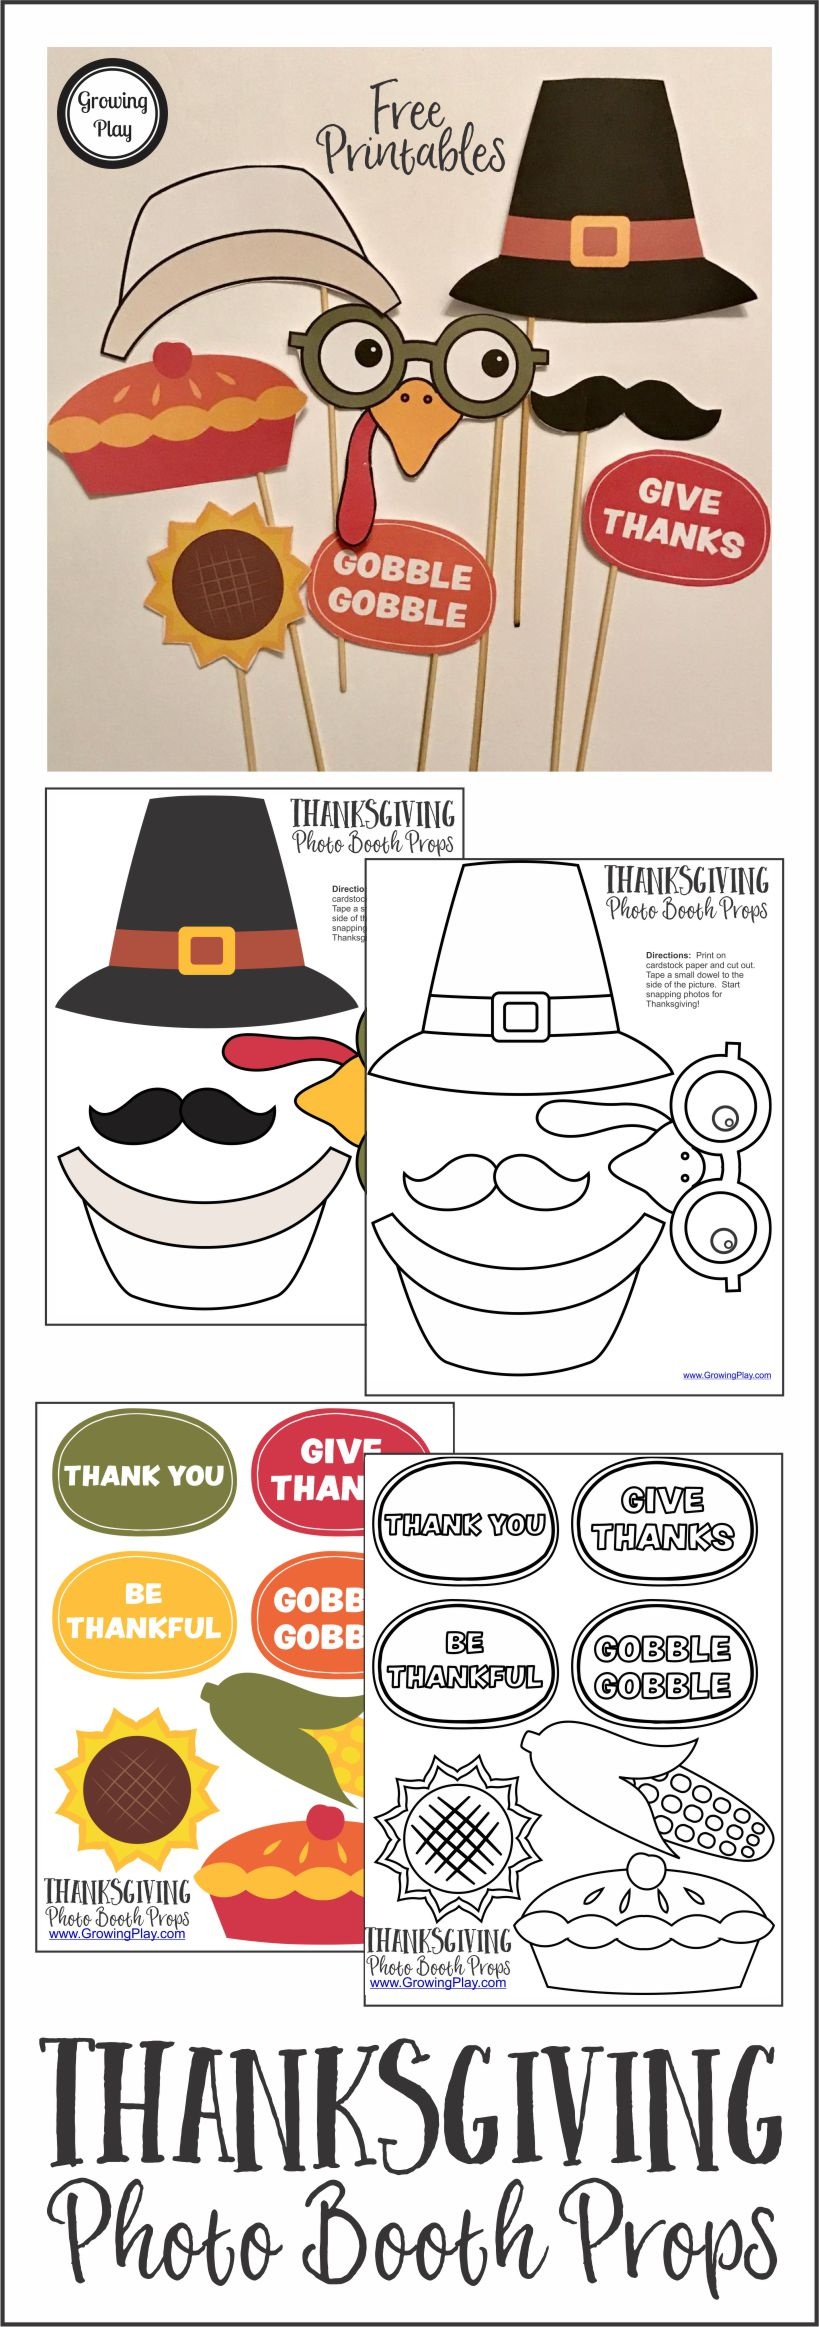 Thanksgiving Photo Booth Props - Growing Play - Free Printable Thanksgiving Photo Props